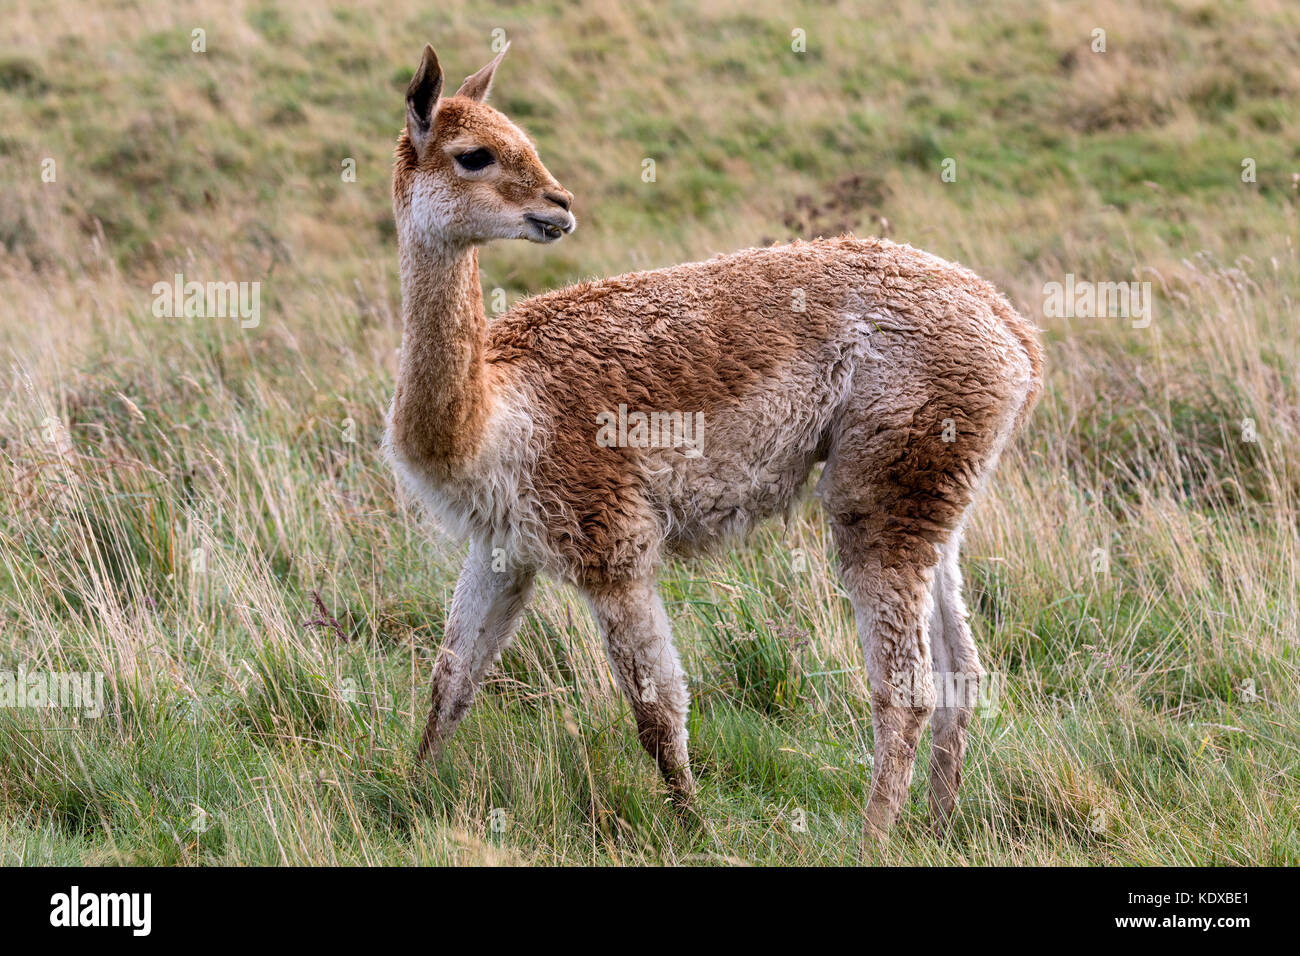 Vicuna in Patagonia in southern Chile. The vicuna is a wild relative of the llama, inhabiting mountainous regions of South America. Stock Photo